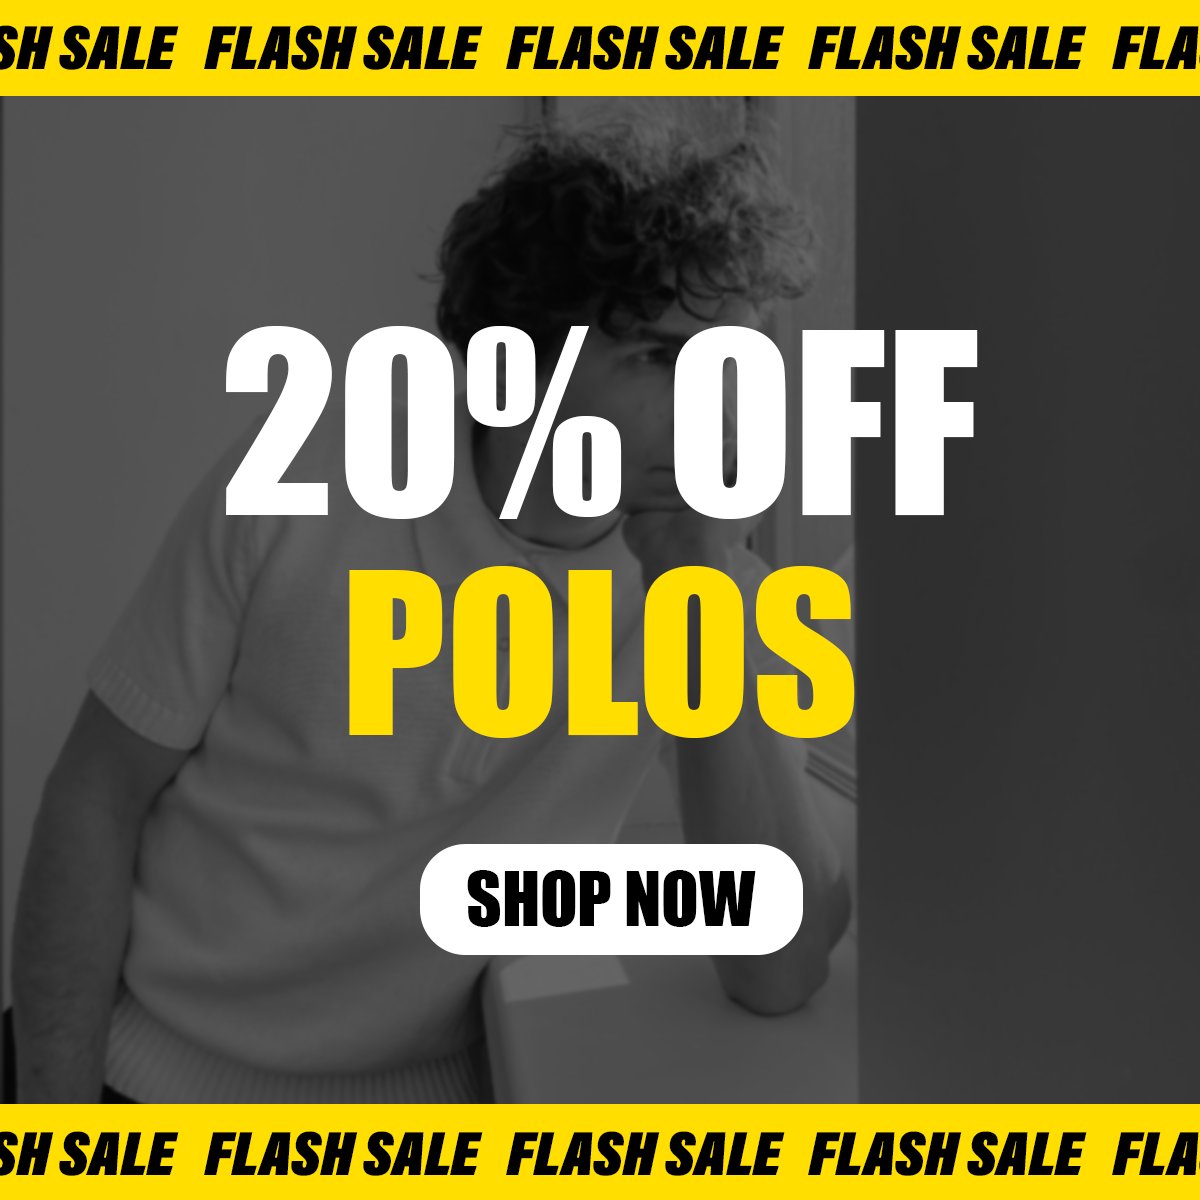 ⚡ FLASH SALE ⚡ That's right. 20% off for the next 24 hours. Get your embroidered polo shirt whilst in stock!! Apparel perfect to wear during the warmer months. Wear club colours wherever you go 🔴 Shop now 👉 thekop.com/sale #LFC